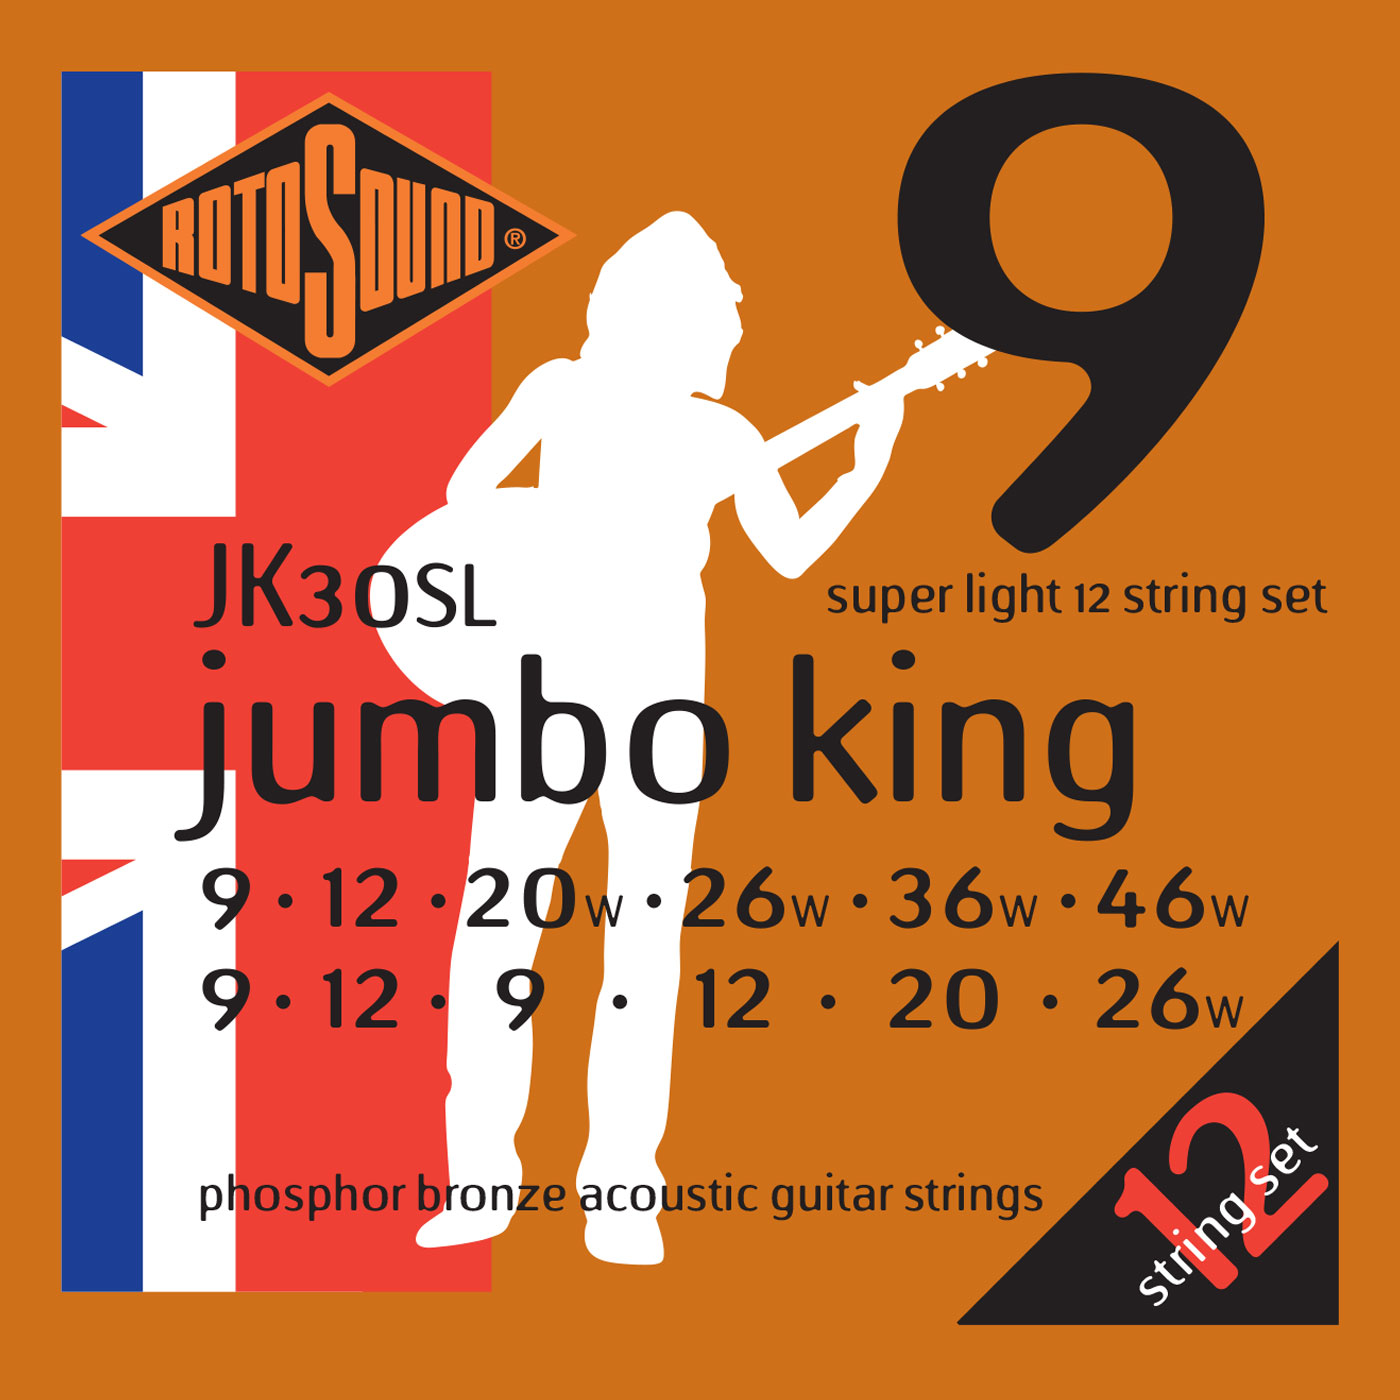 An image of Rotosound Jumbo King 12 String Super Light Acoustic Strings 9-46 | PMT Online